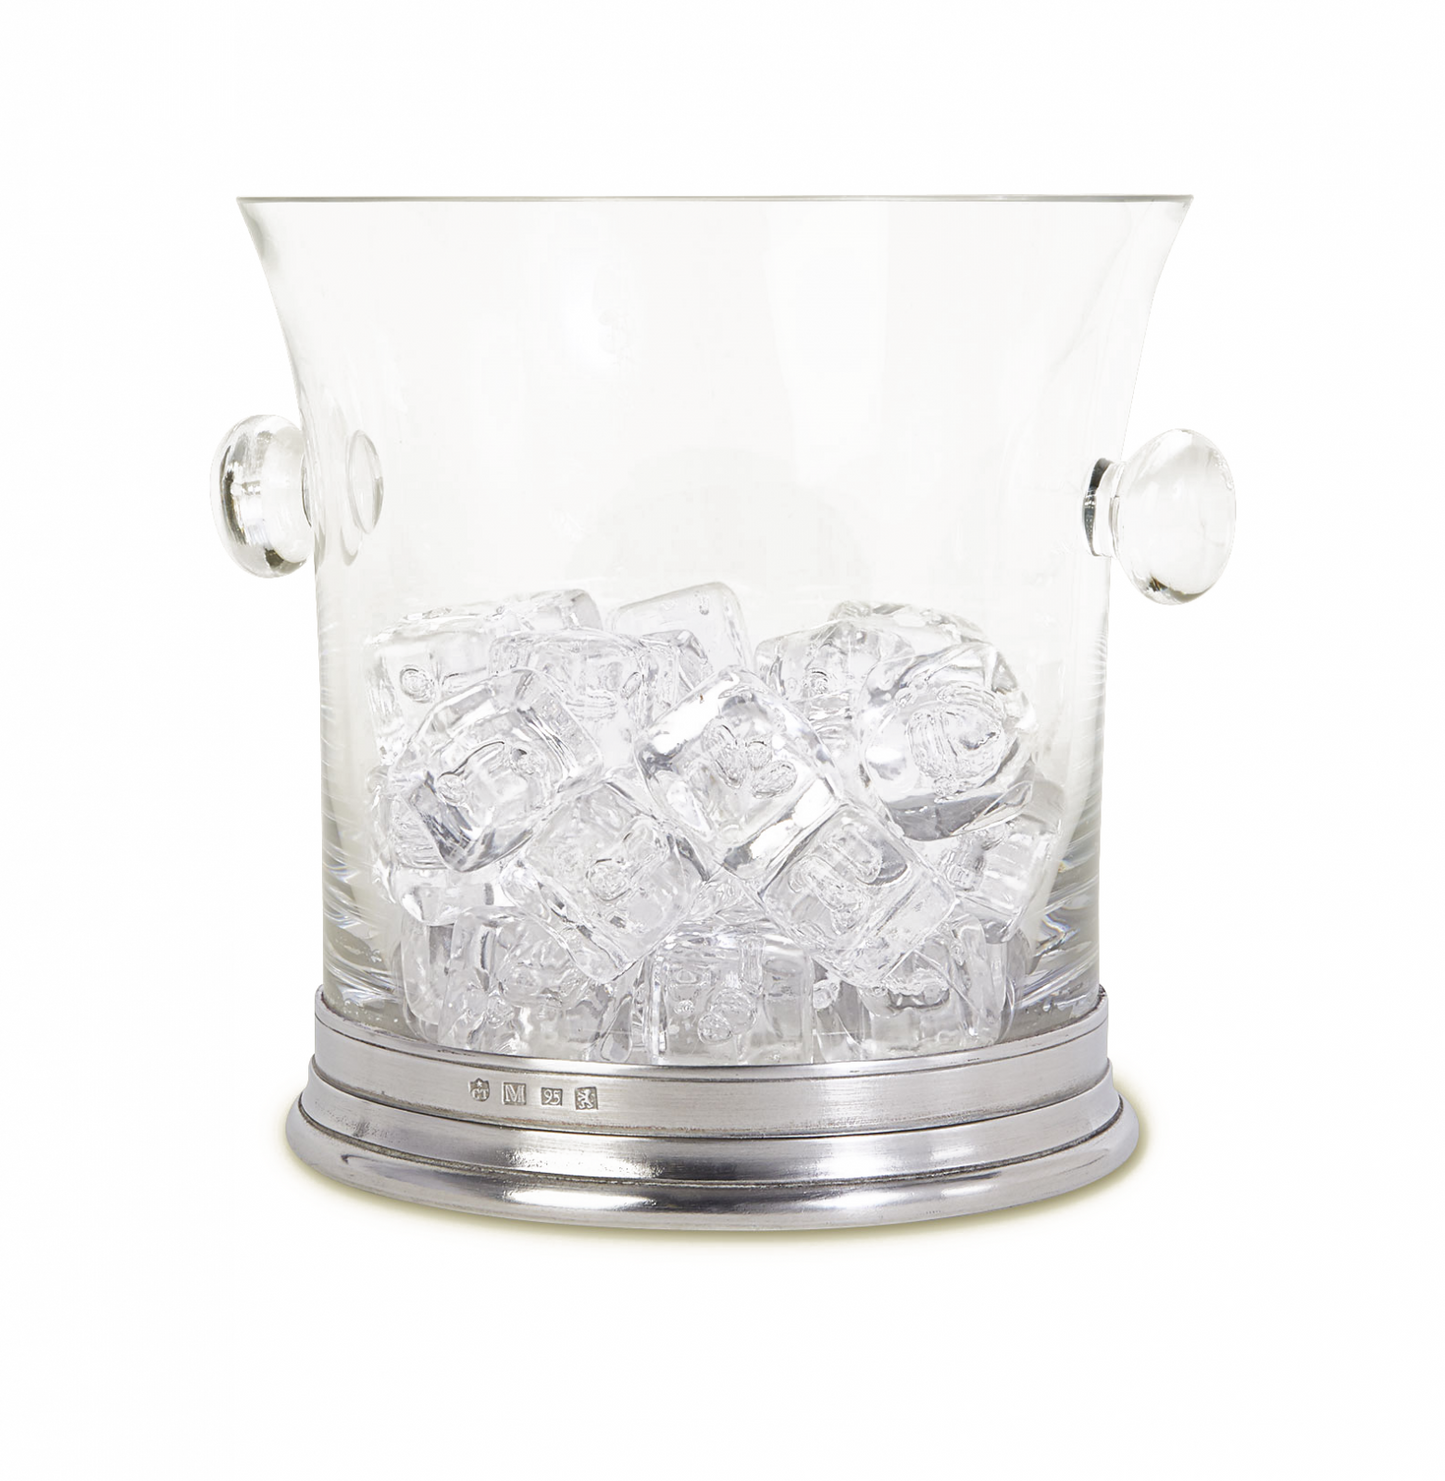 Match Pewter Crystal Ice Bucket with Handles